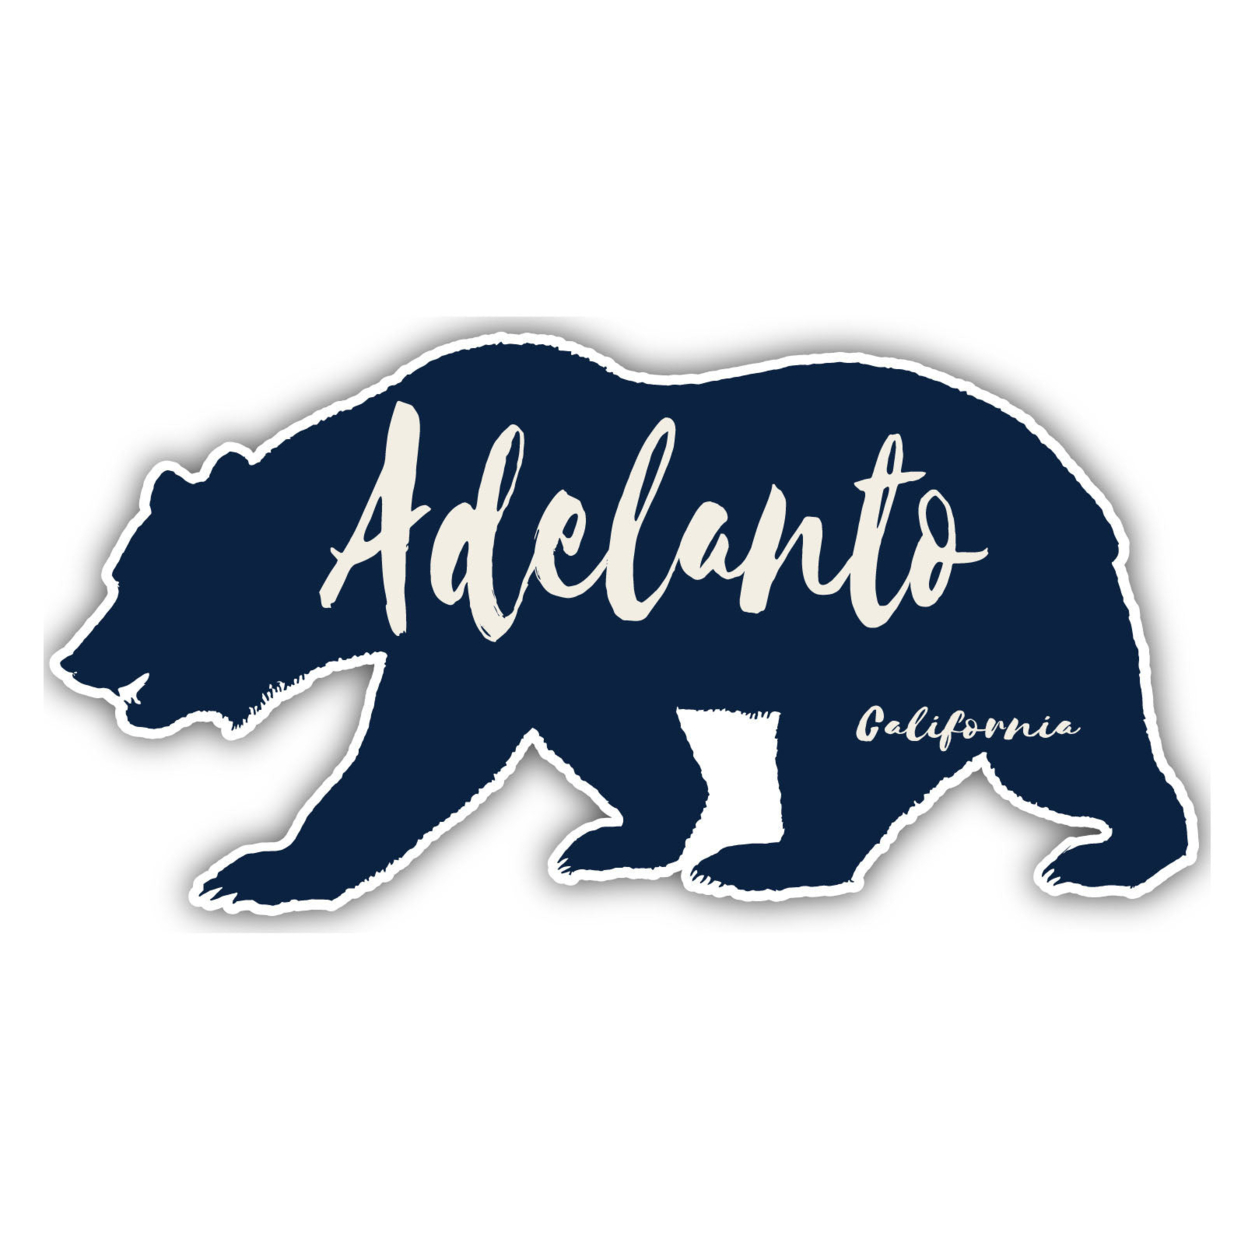 Adelanto California Souvenir Decorative Stickers (Choose Theme And Size) - 4-Pack, 8-Inch, Bear